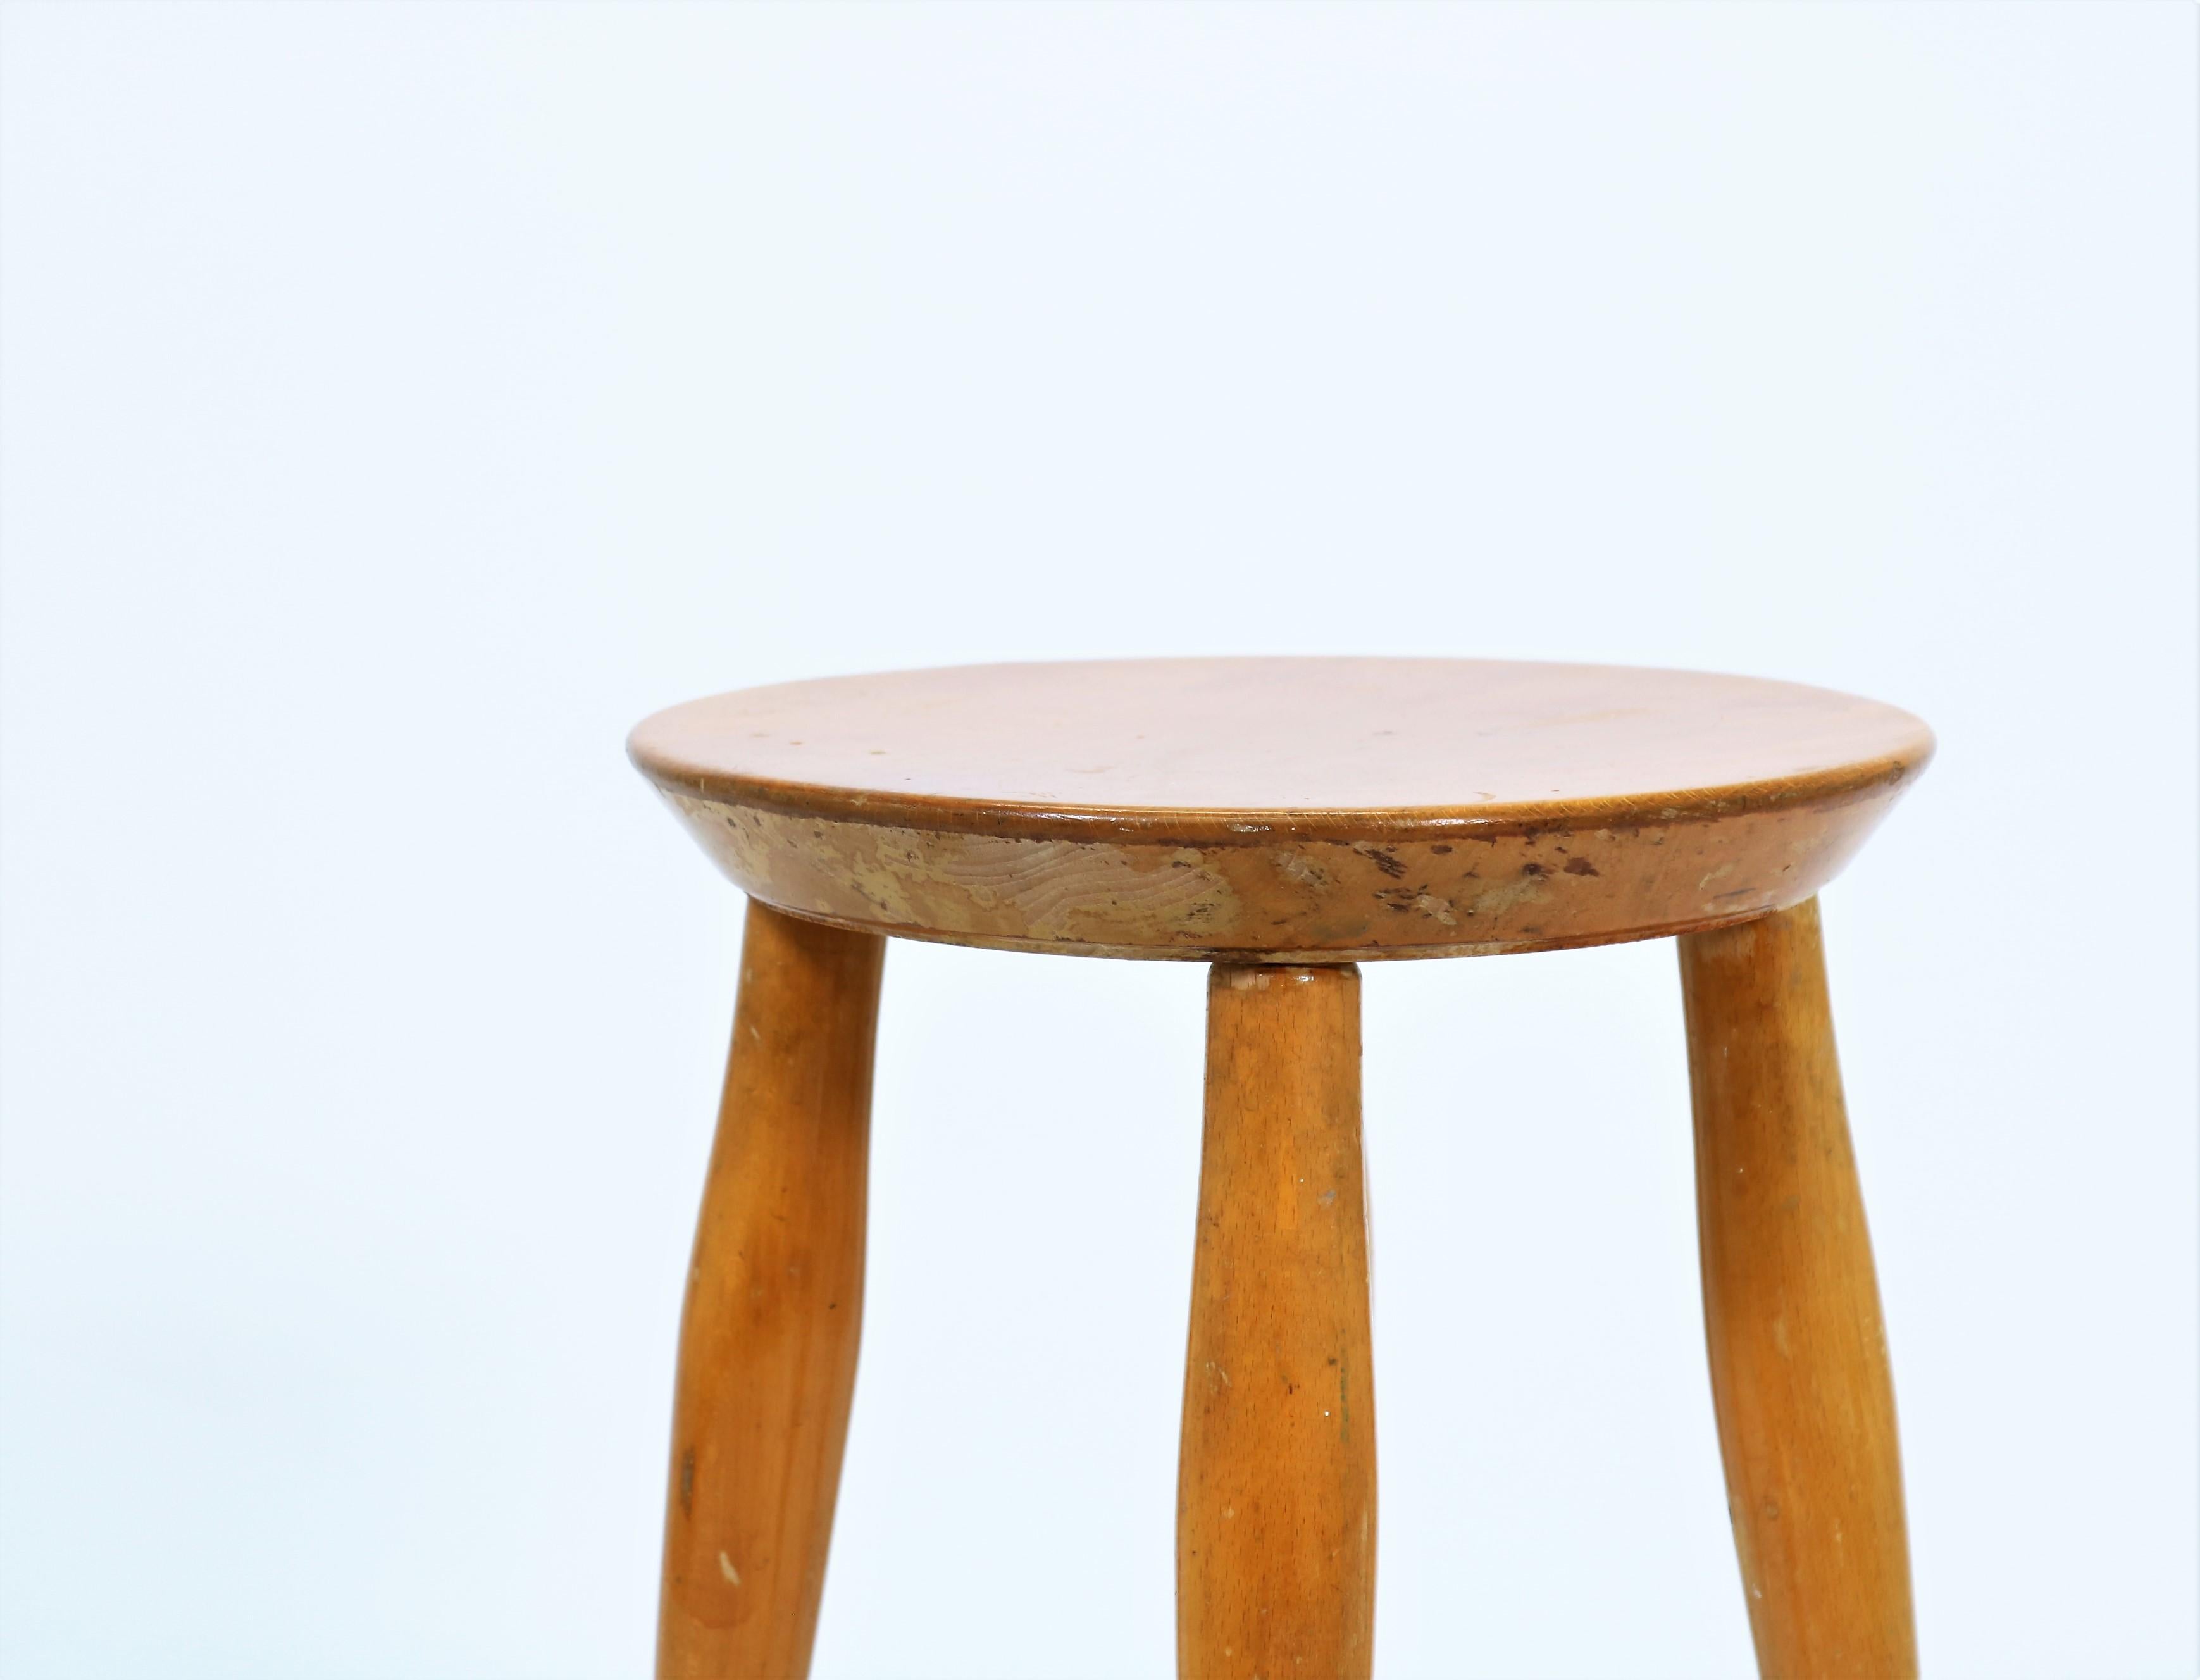 Unique and beautifully worn stool by an unknown Danish cabinetmaker. Probably made in the 1930s-1940s in the early days of the Danish Modern movement. The stool is skillfully crafted in lacquered beech with lots of brilliant details. The style is